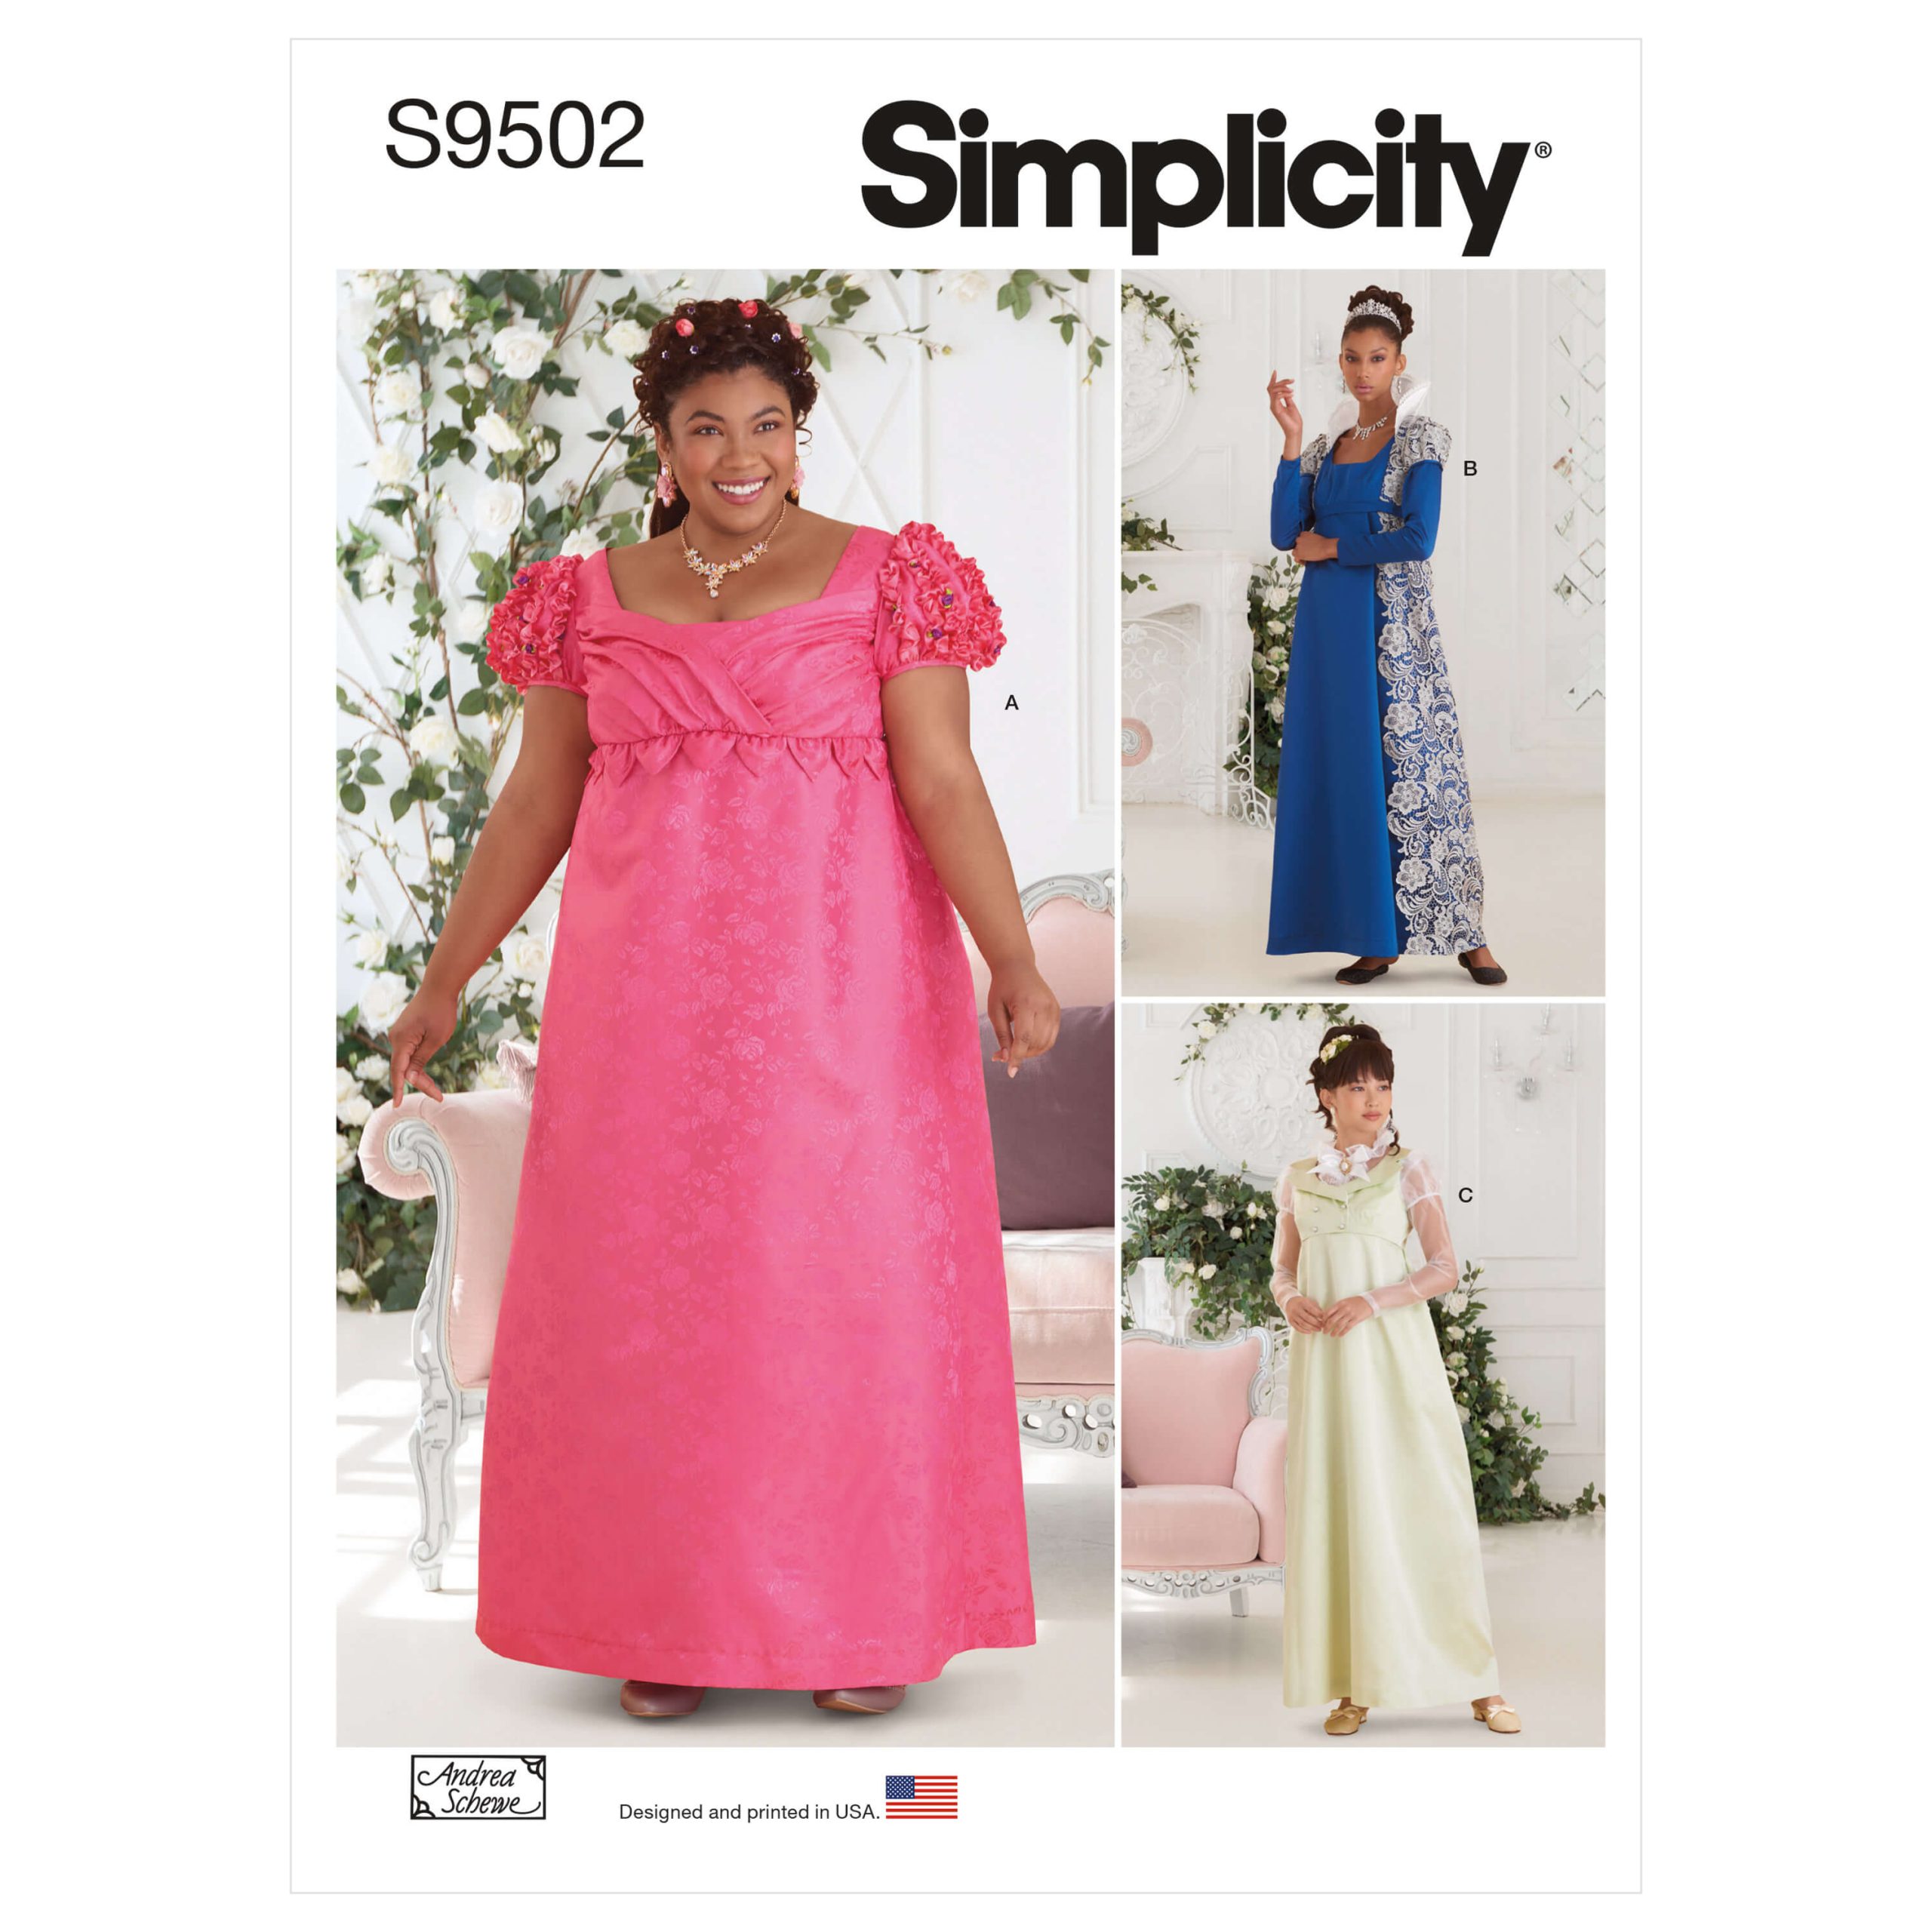 Simplicity Sewing Pattern S9502 Misses' and Women's Regency Costume Gowns